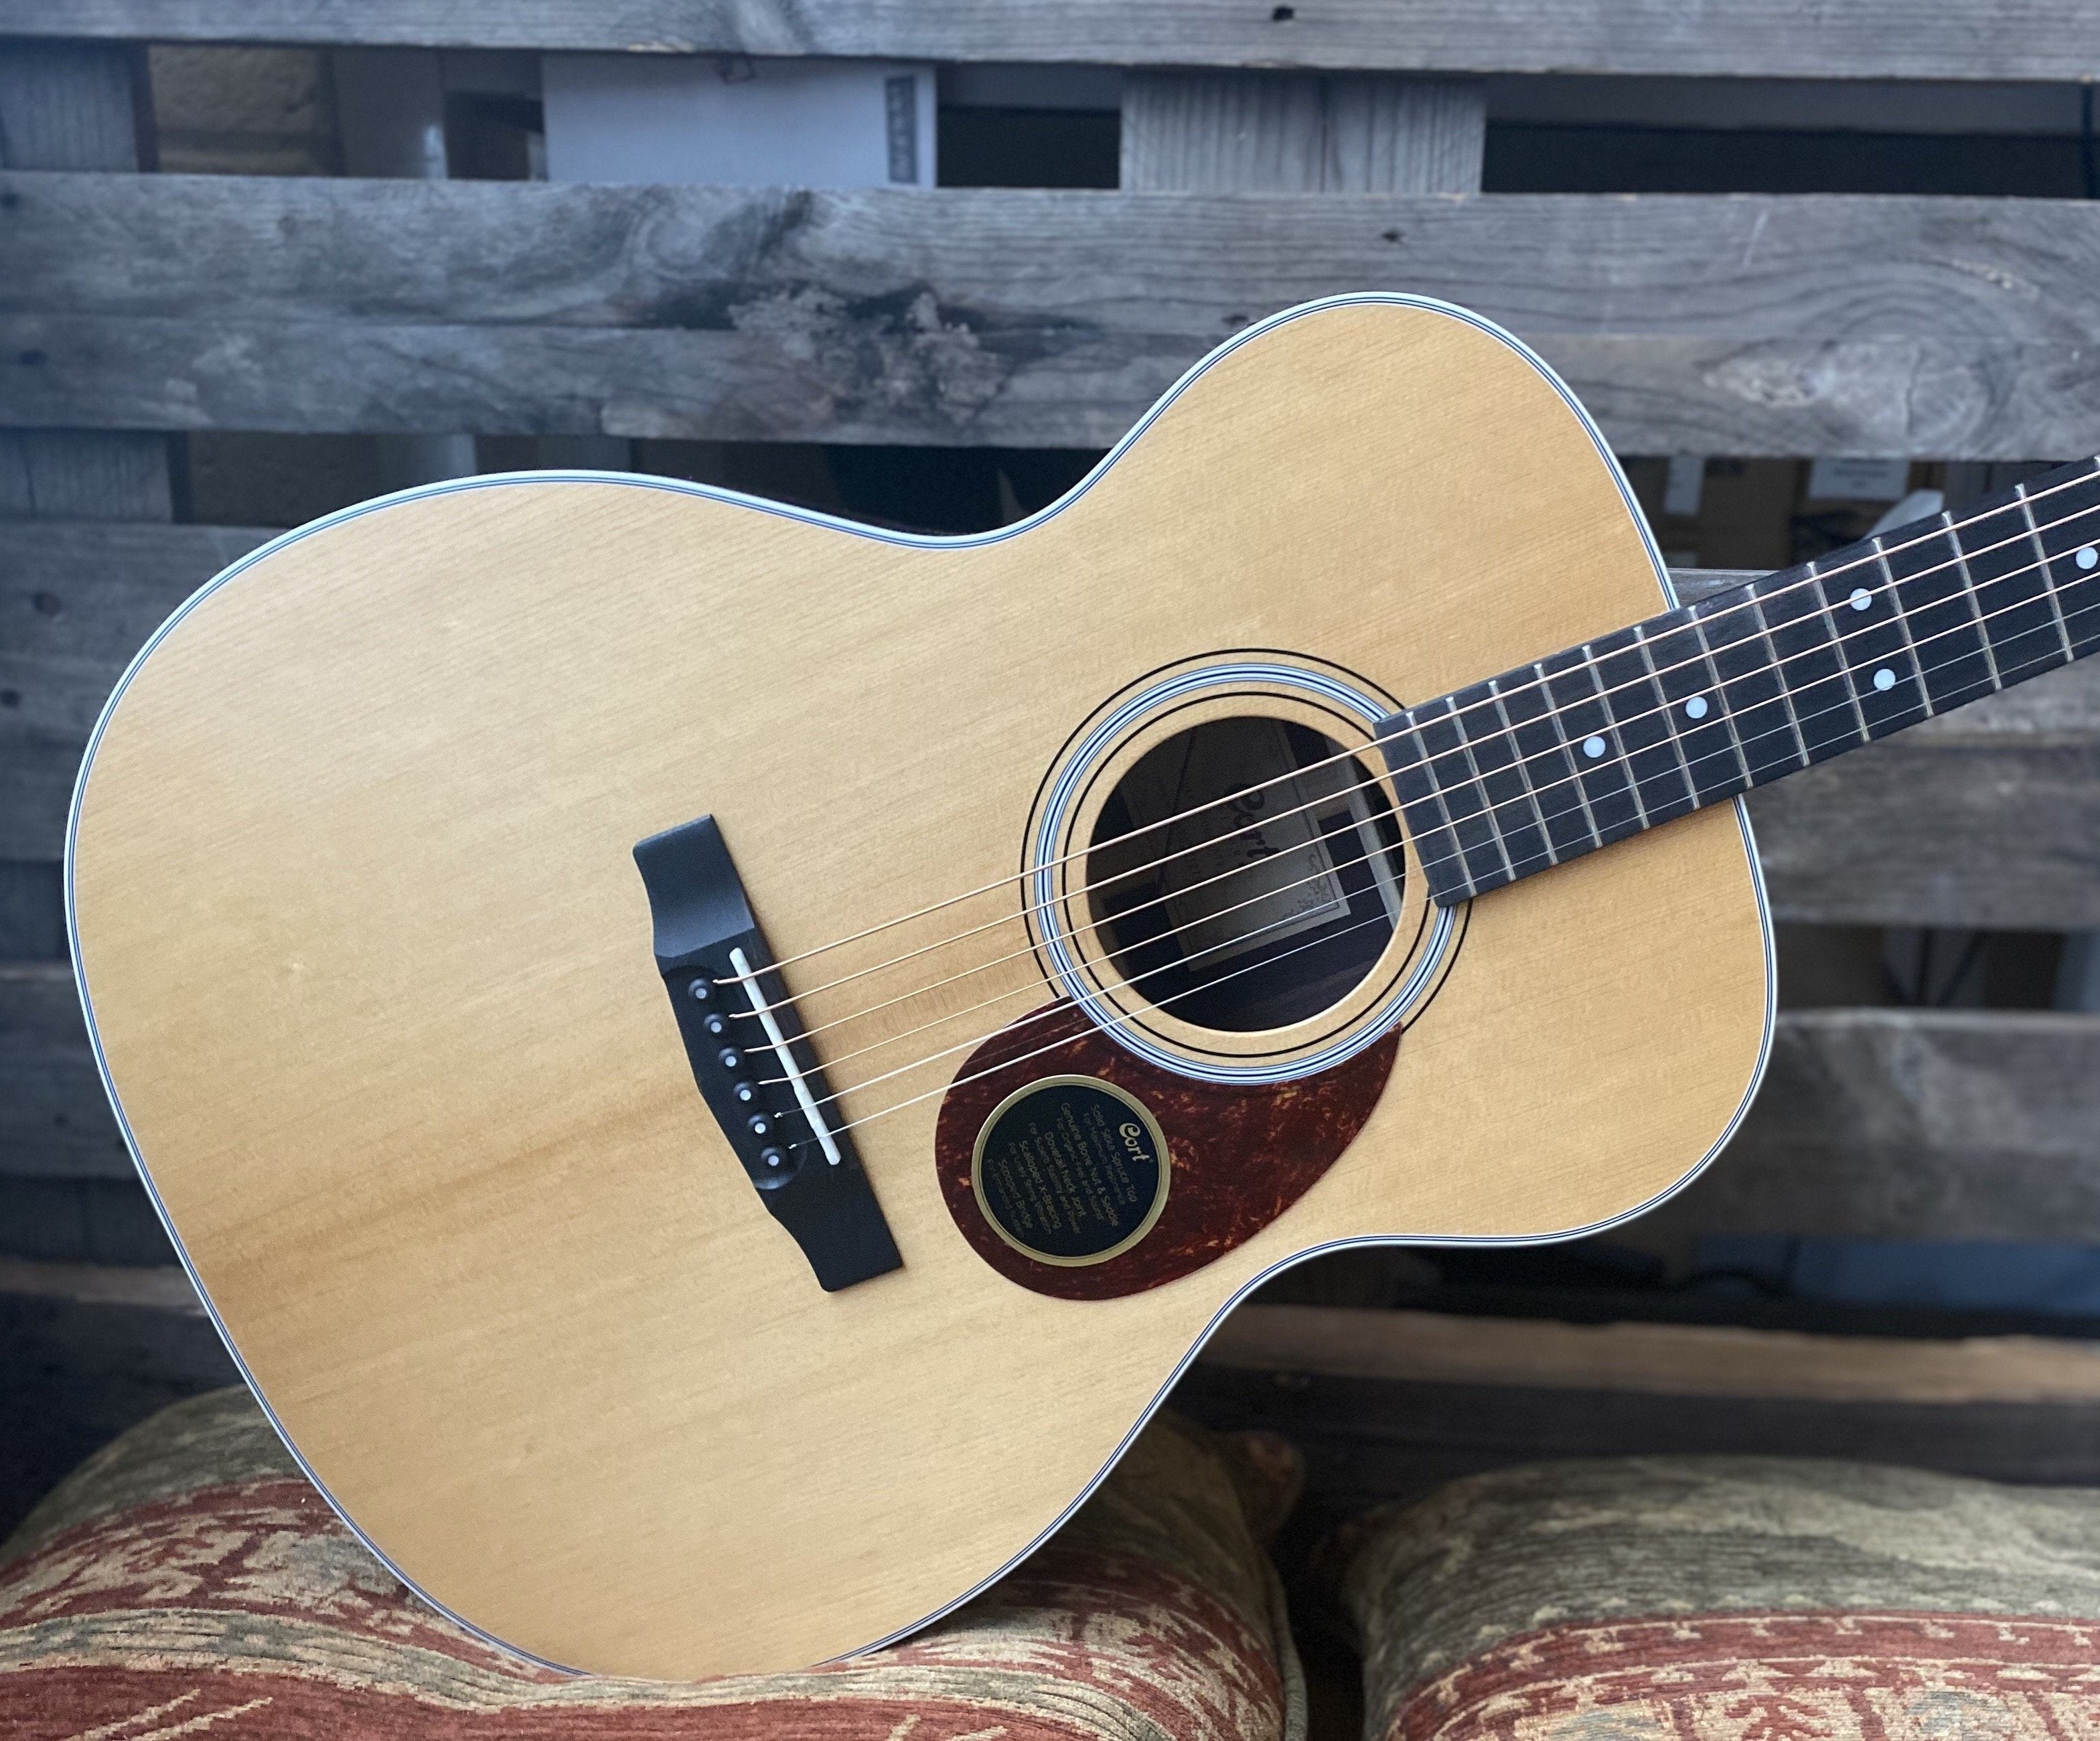 Cort Luce L200F ATV Semi Gloss, Electro Acoustic Guitar for sale at Richards Guitars.